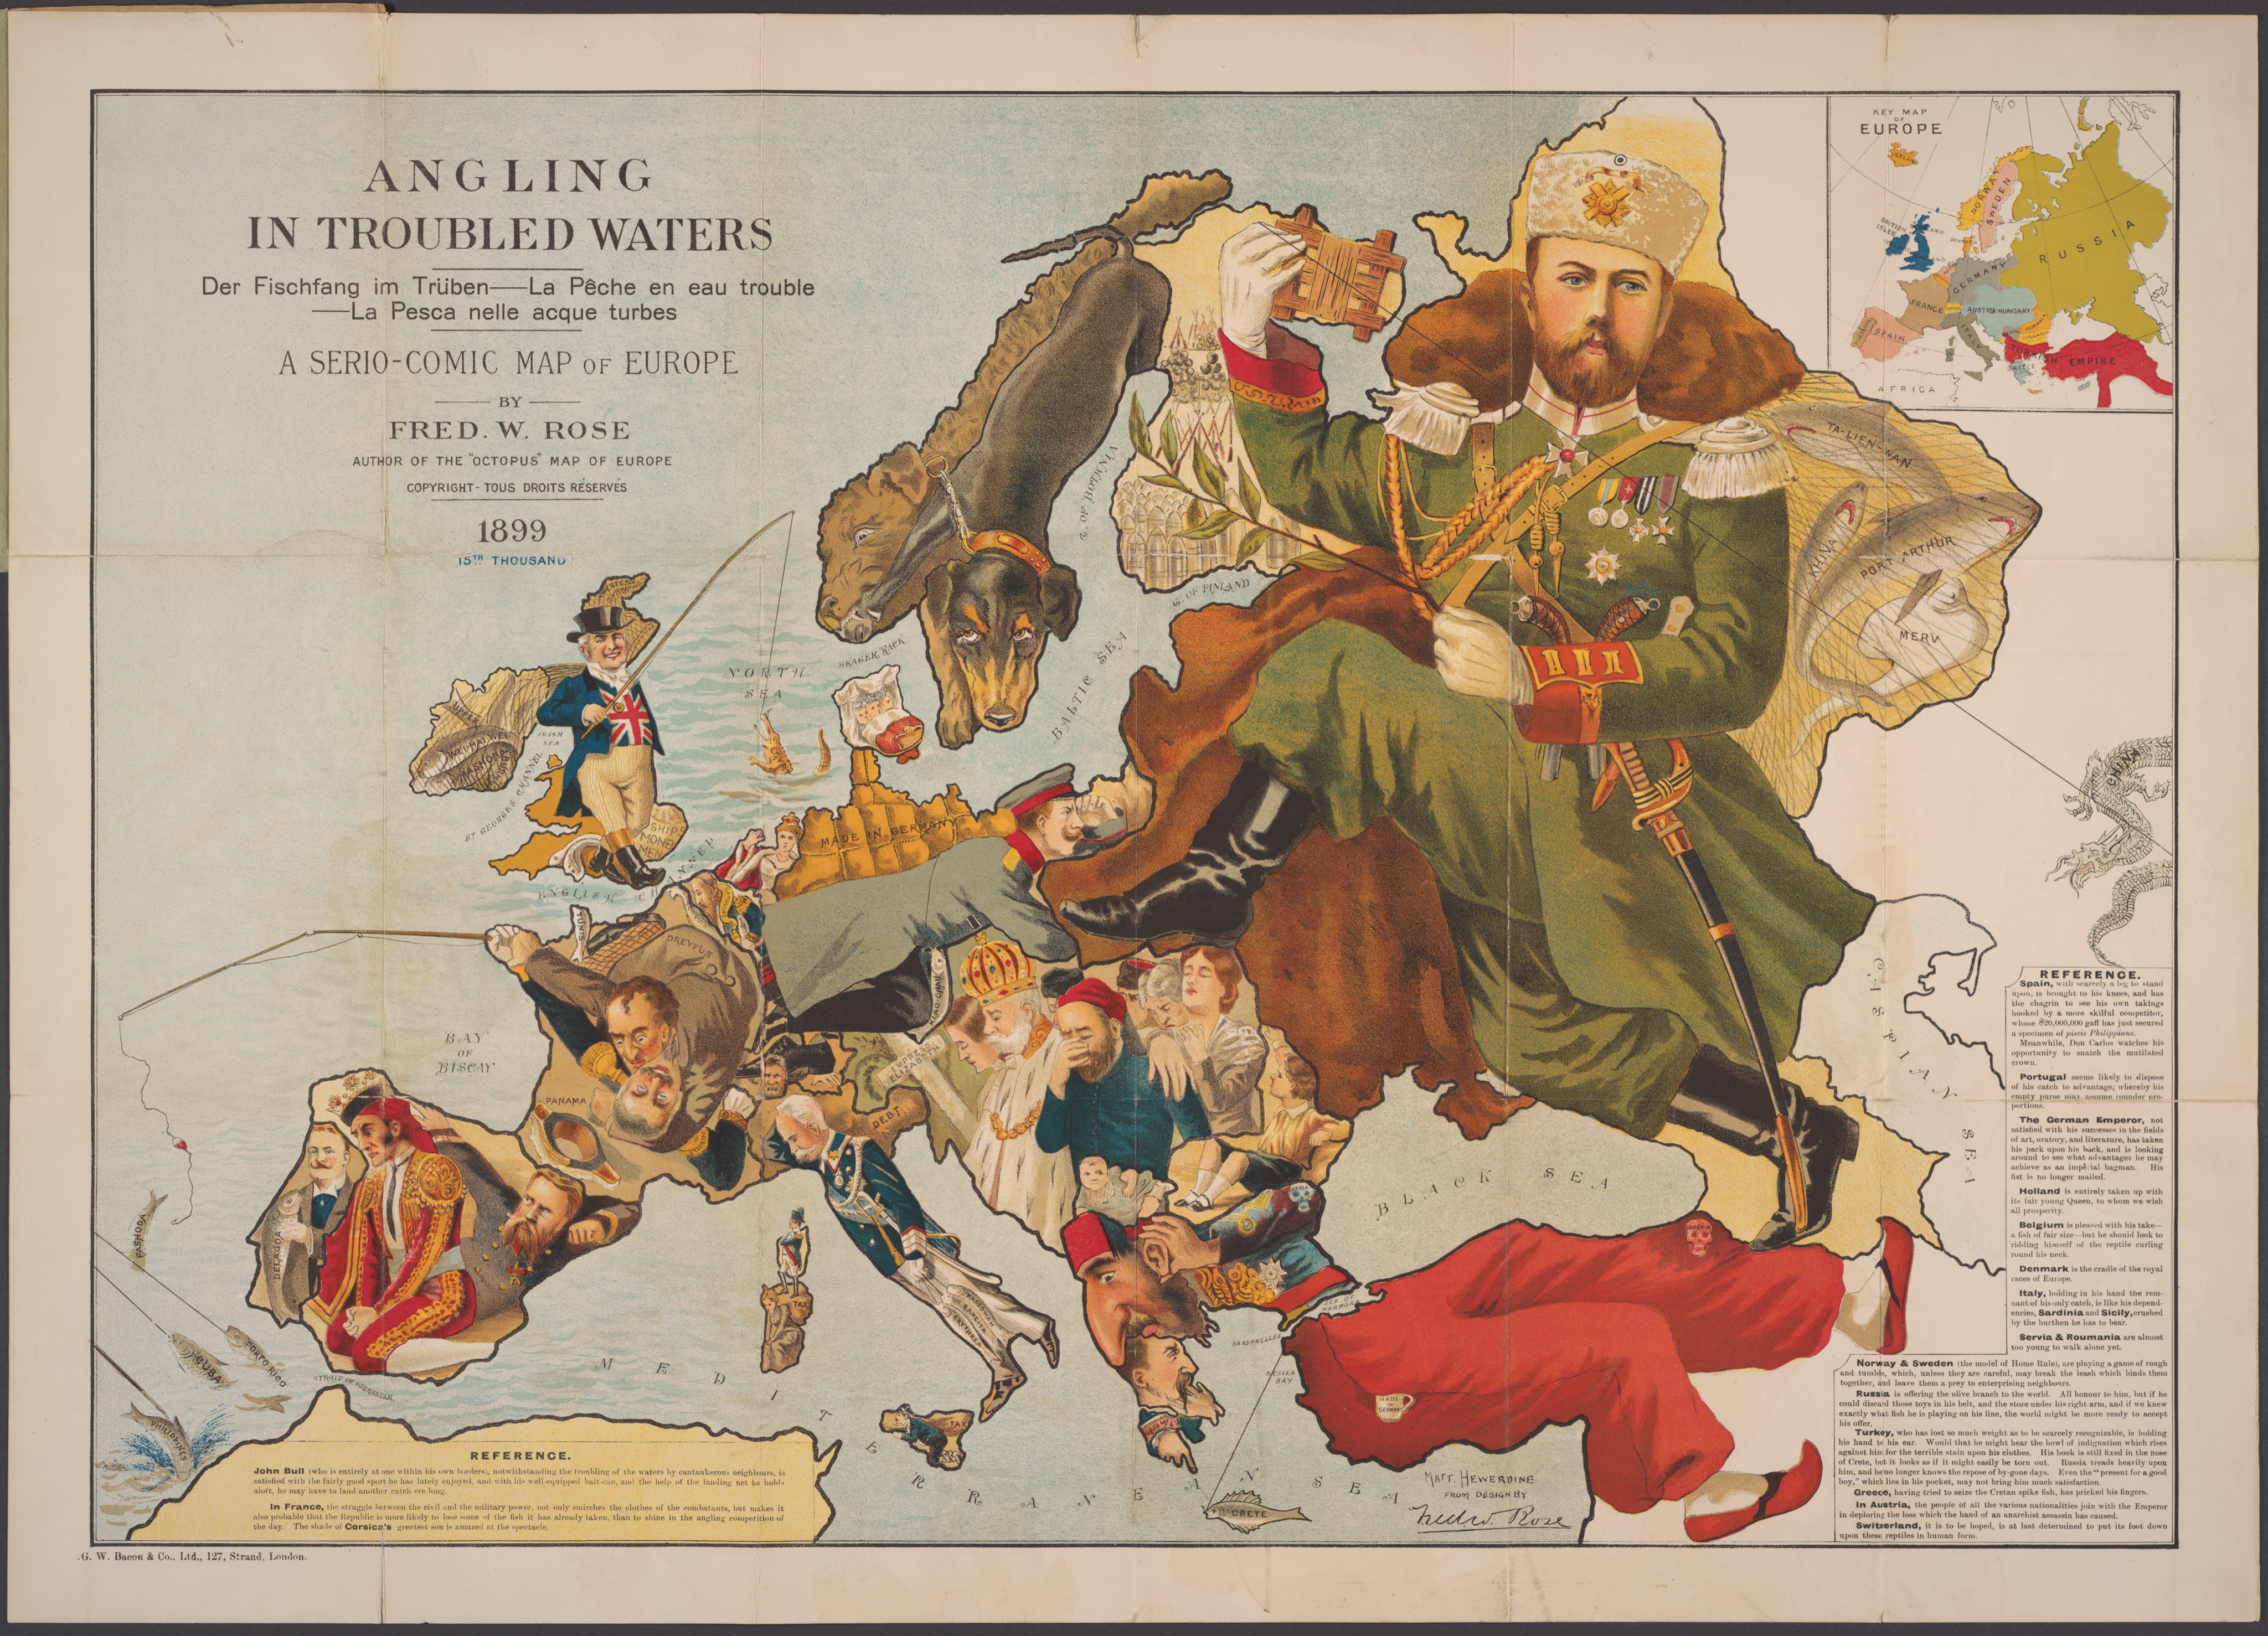 Cartoon: Angling for spoils (1899), Fred W. Rose